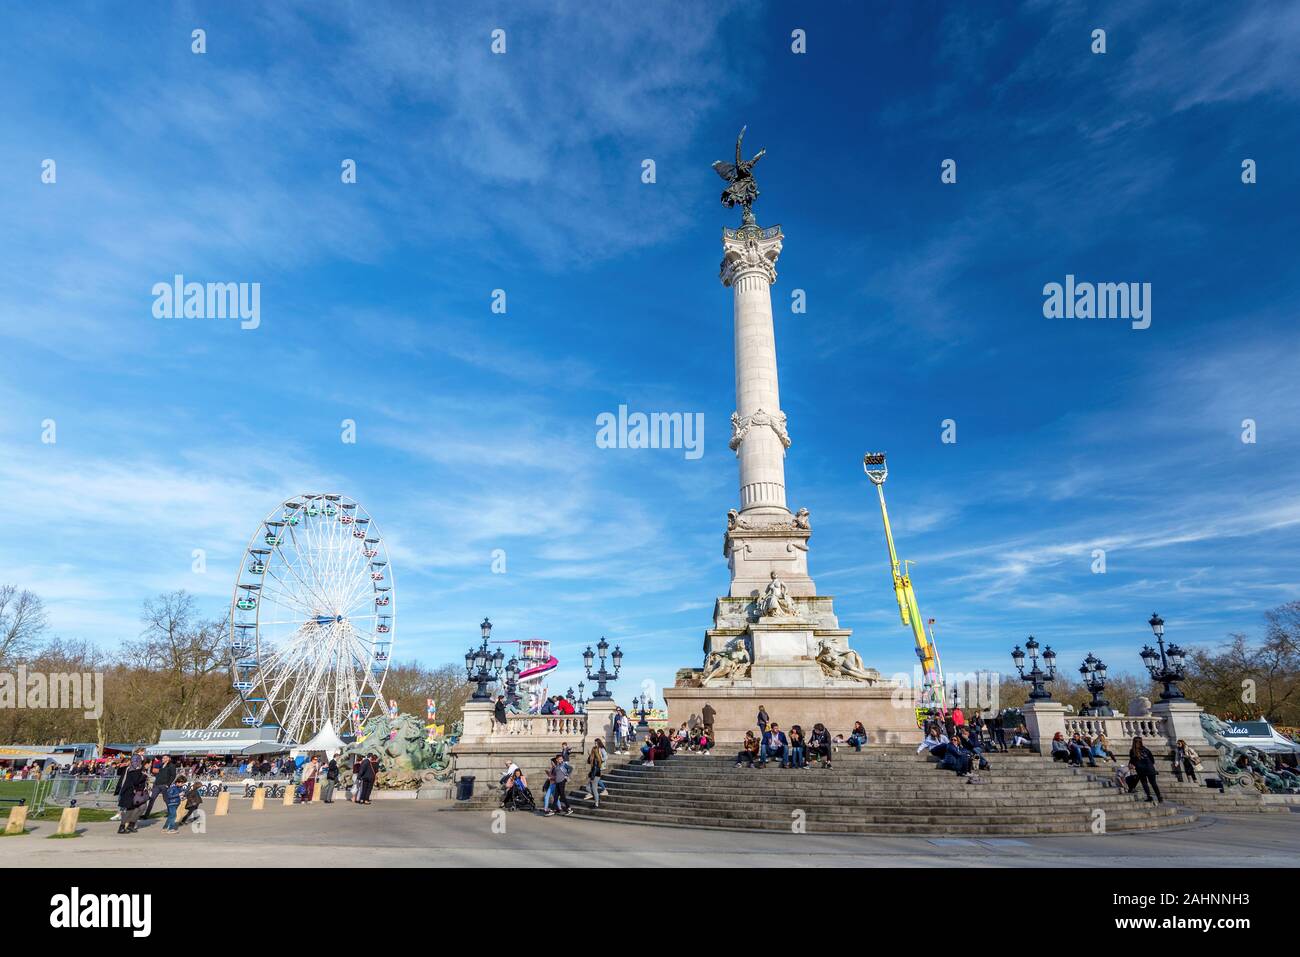 Fan Fair High Resolution Stock Photography and Images - Alamy